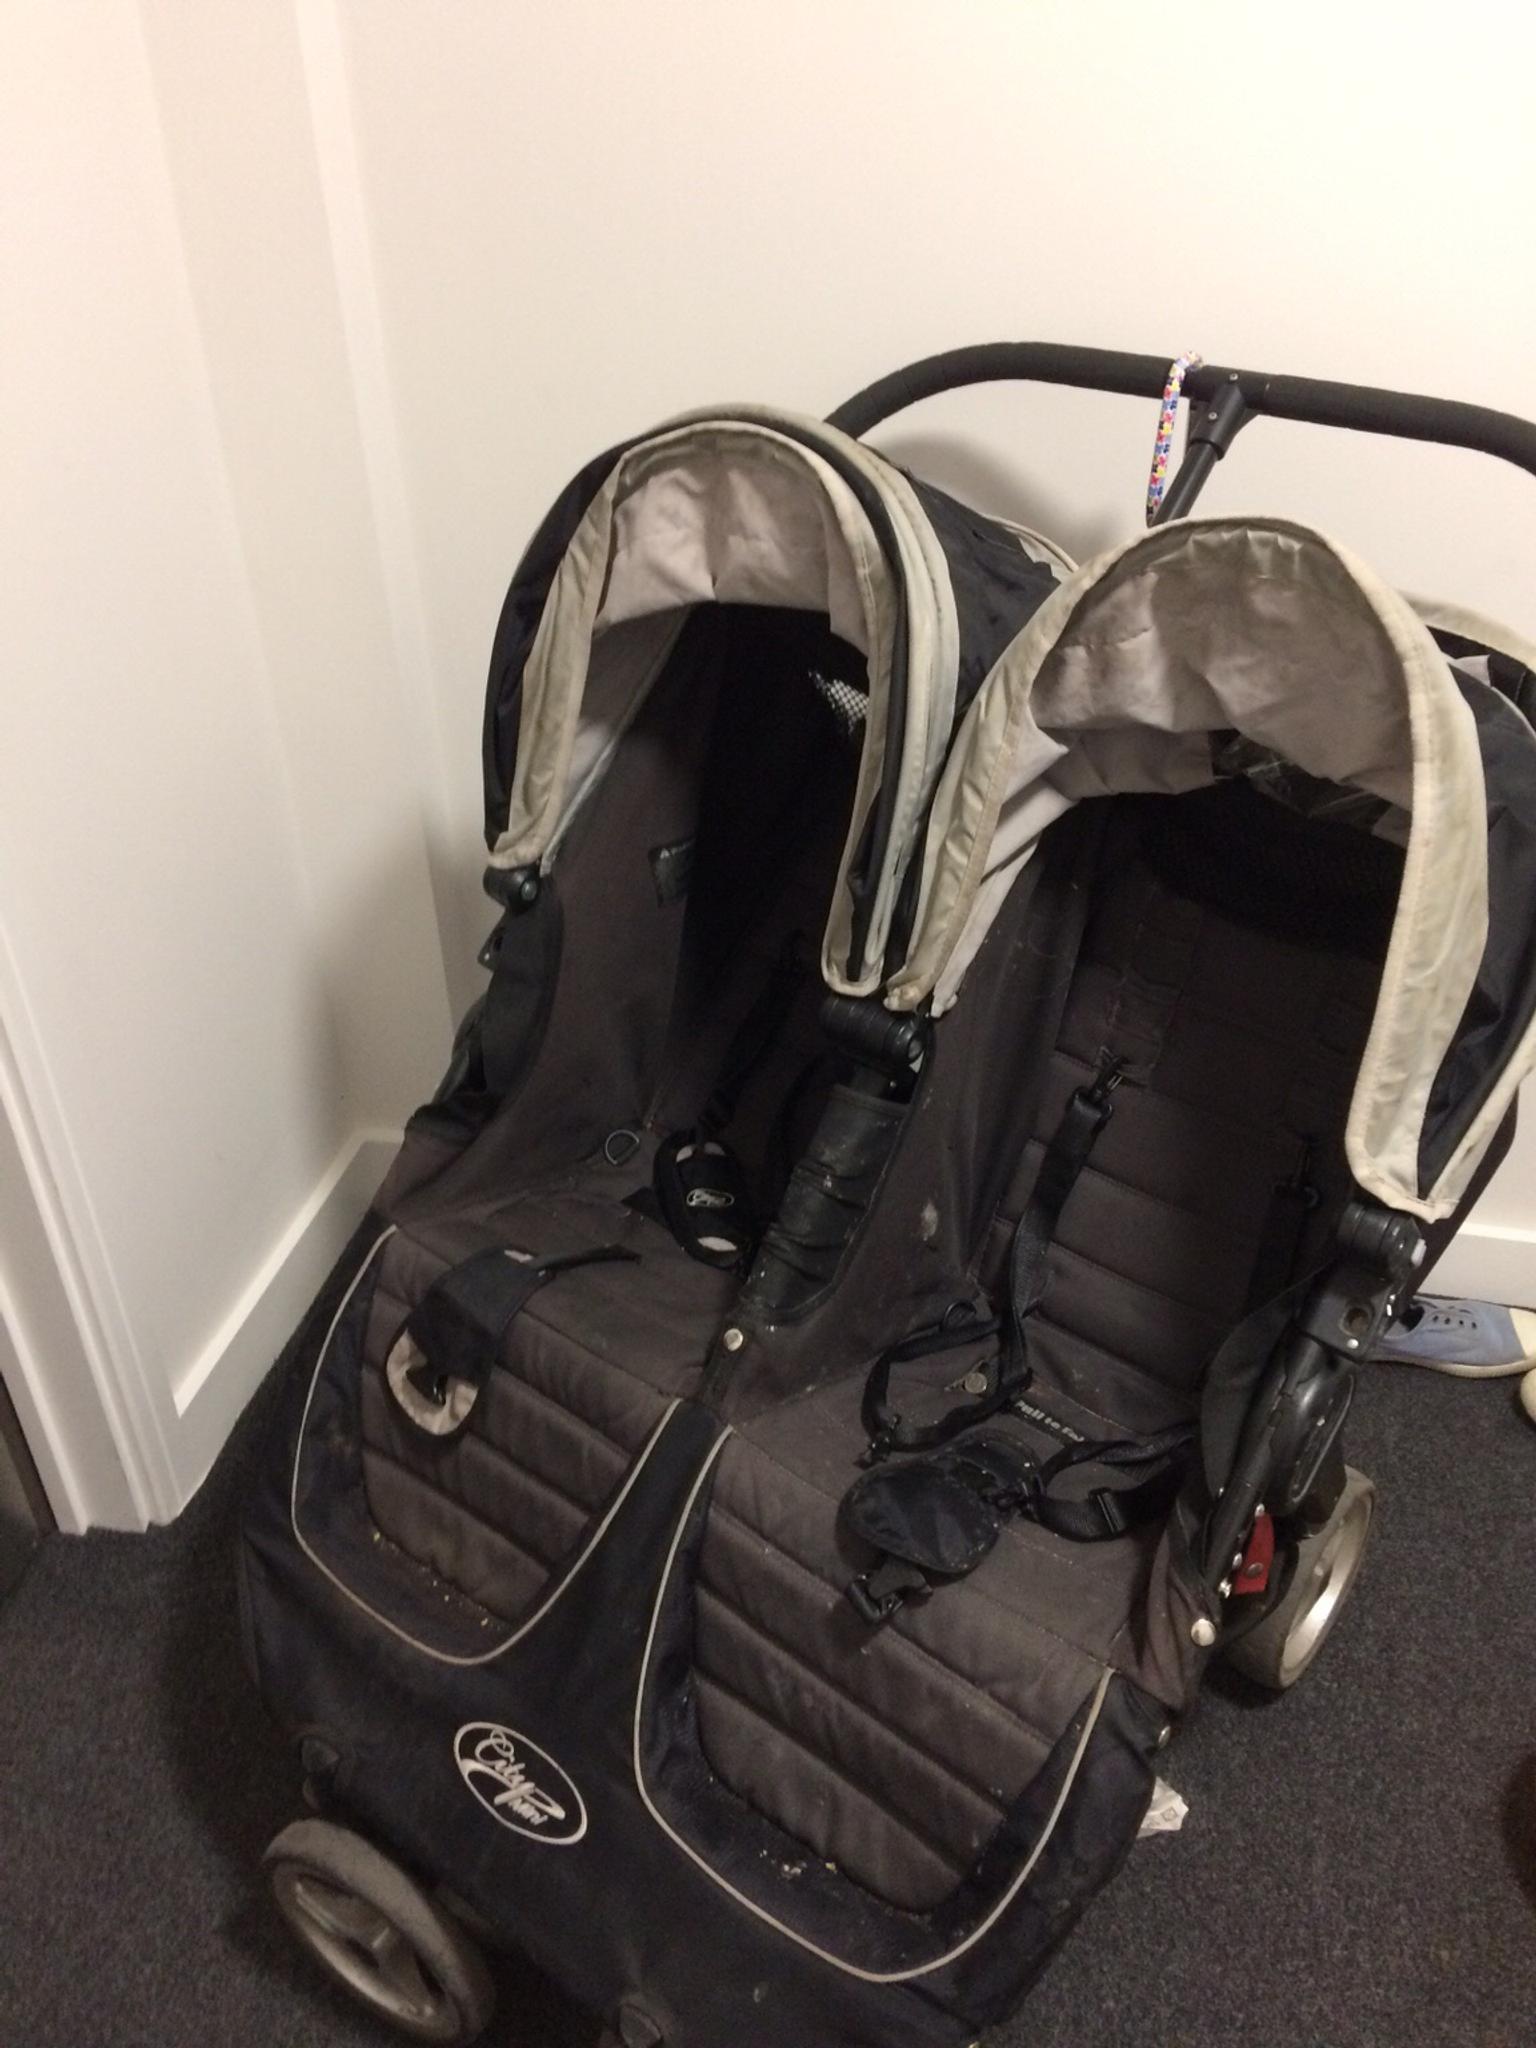 2nd hand double pushchairs